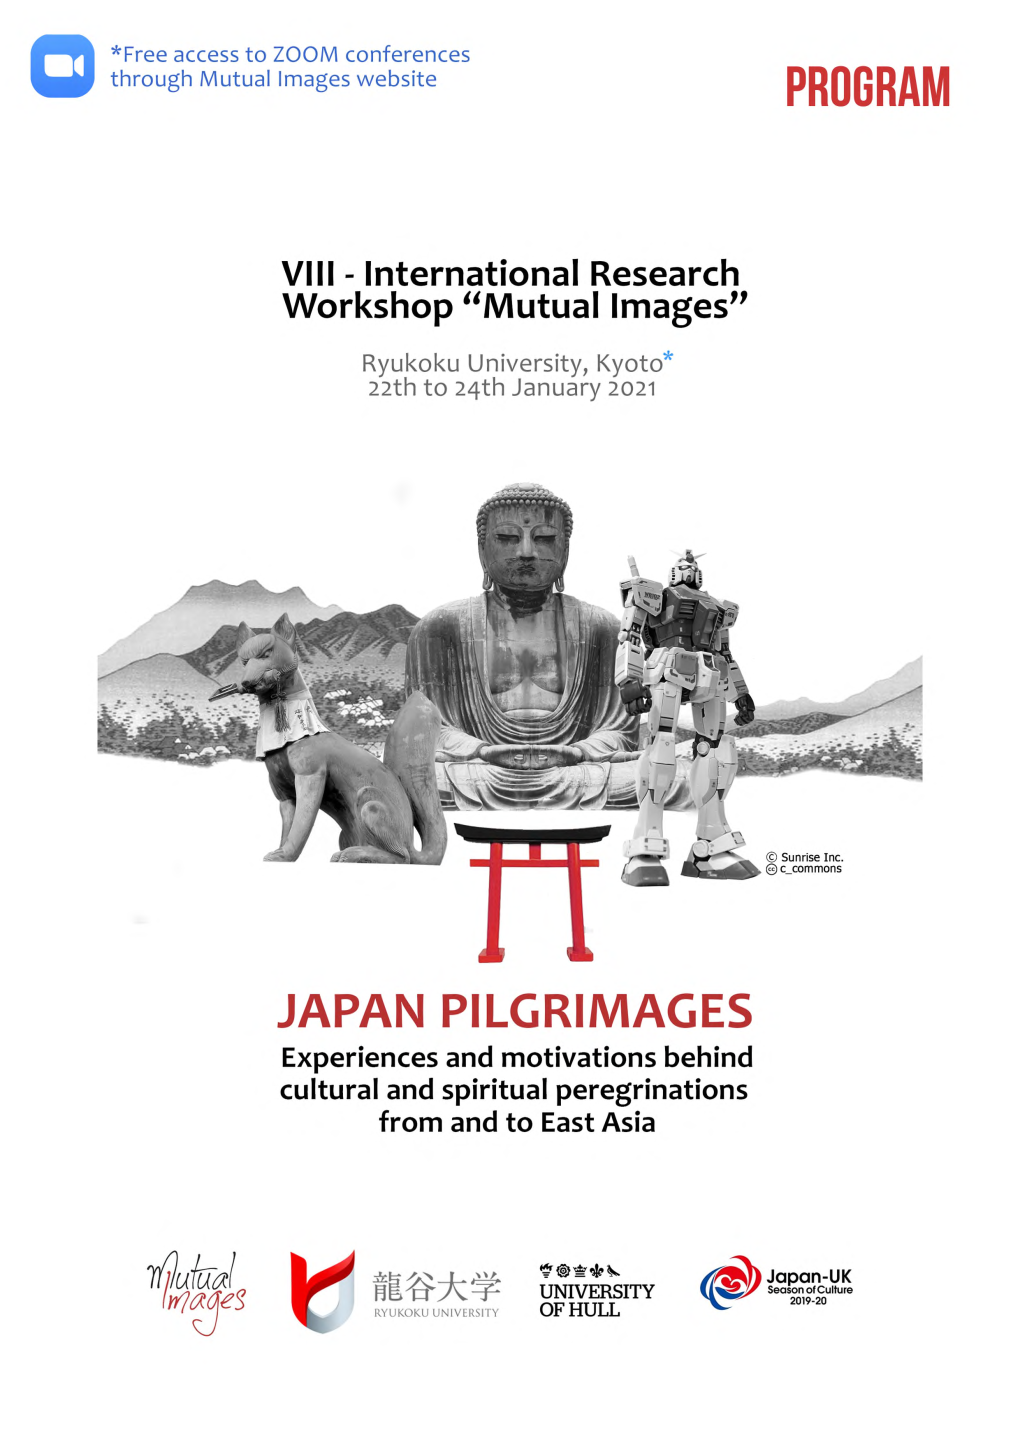 JAPAN PILGRIMAGES Experiences and Motivations Behind Cultural and Spiritual Peregrinations from and to East Asia